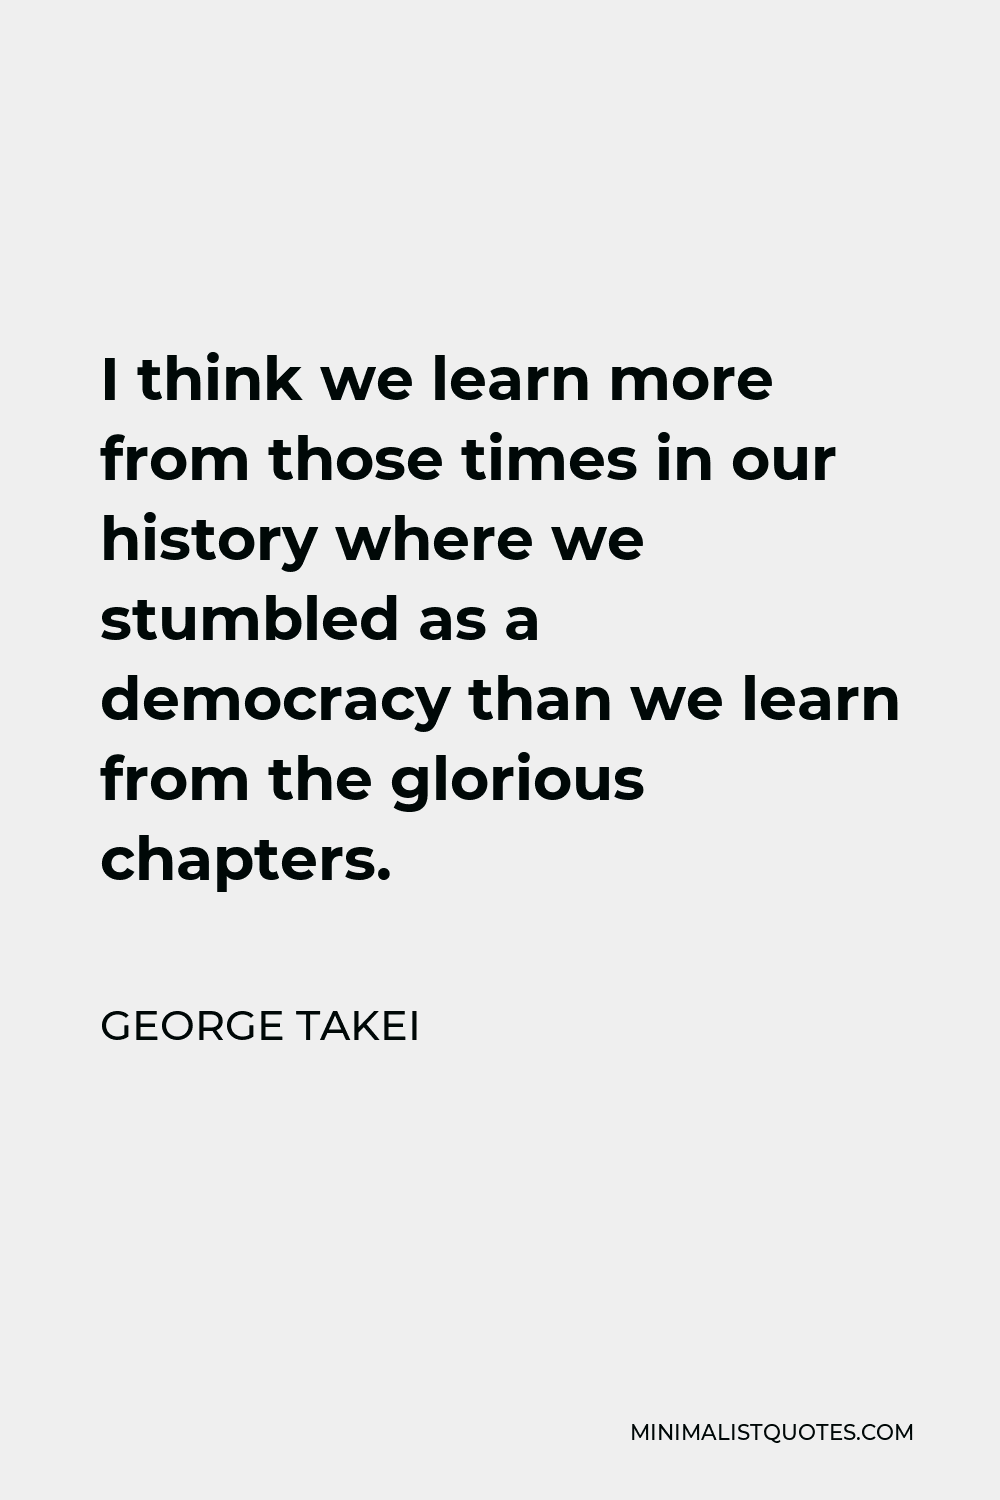 George Takei Quote - I think we learn more from those times in our history where we stumbled as a democracy than we learn from the glorious chapters.